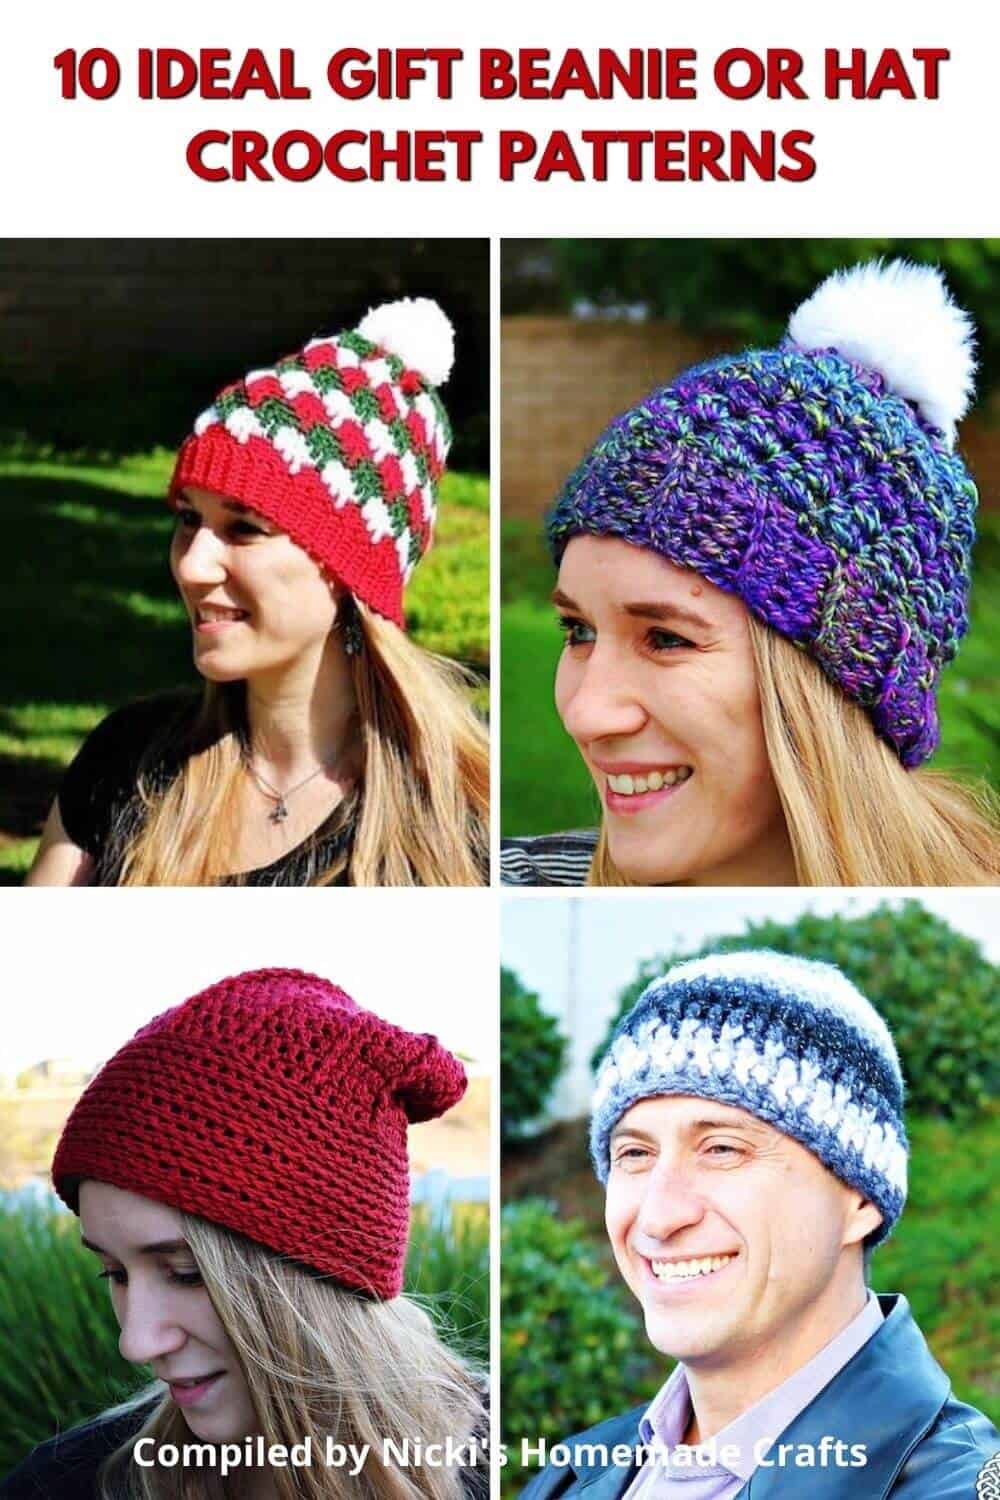 Ideal Gift Beanie or Hat Crochet Patterns for Last Minute Gift Ideas ...